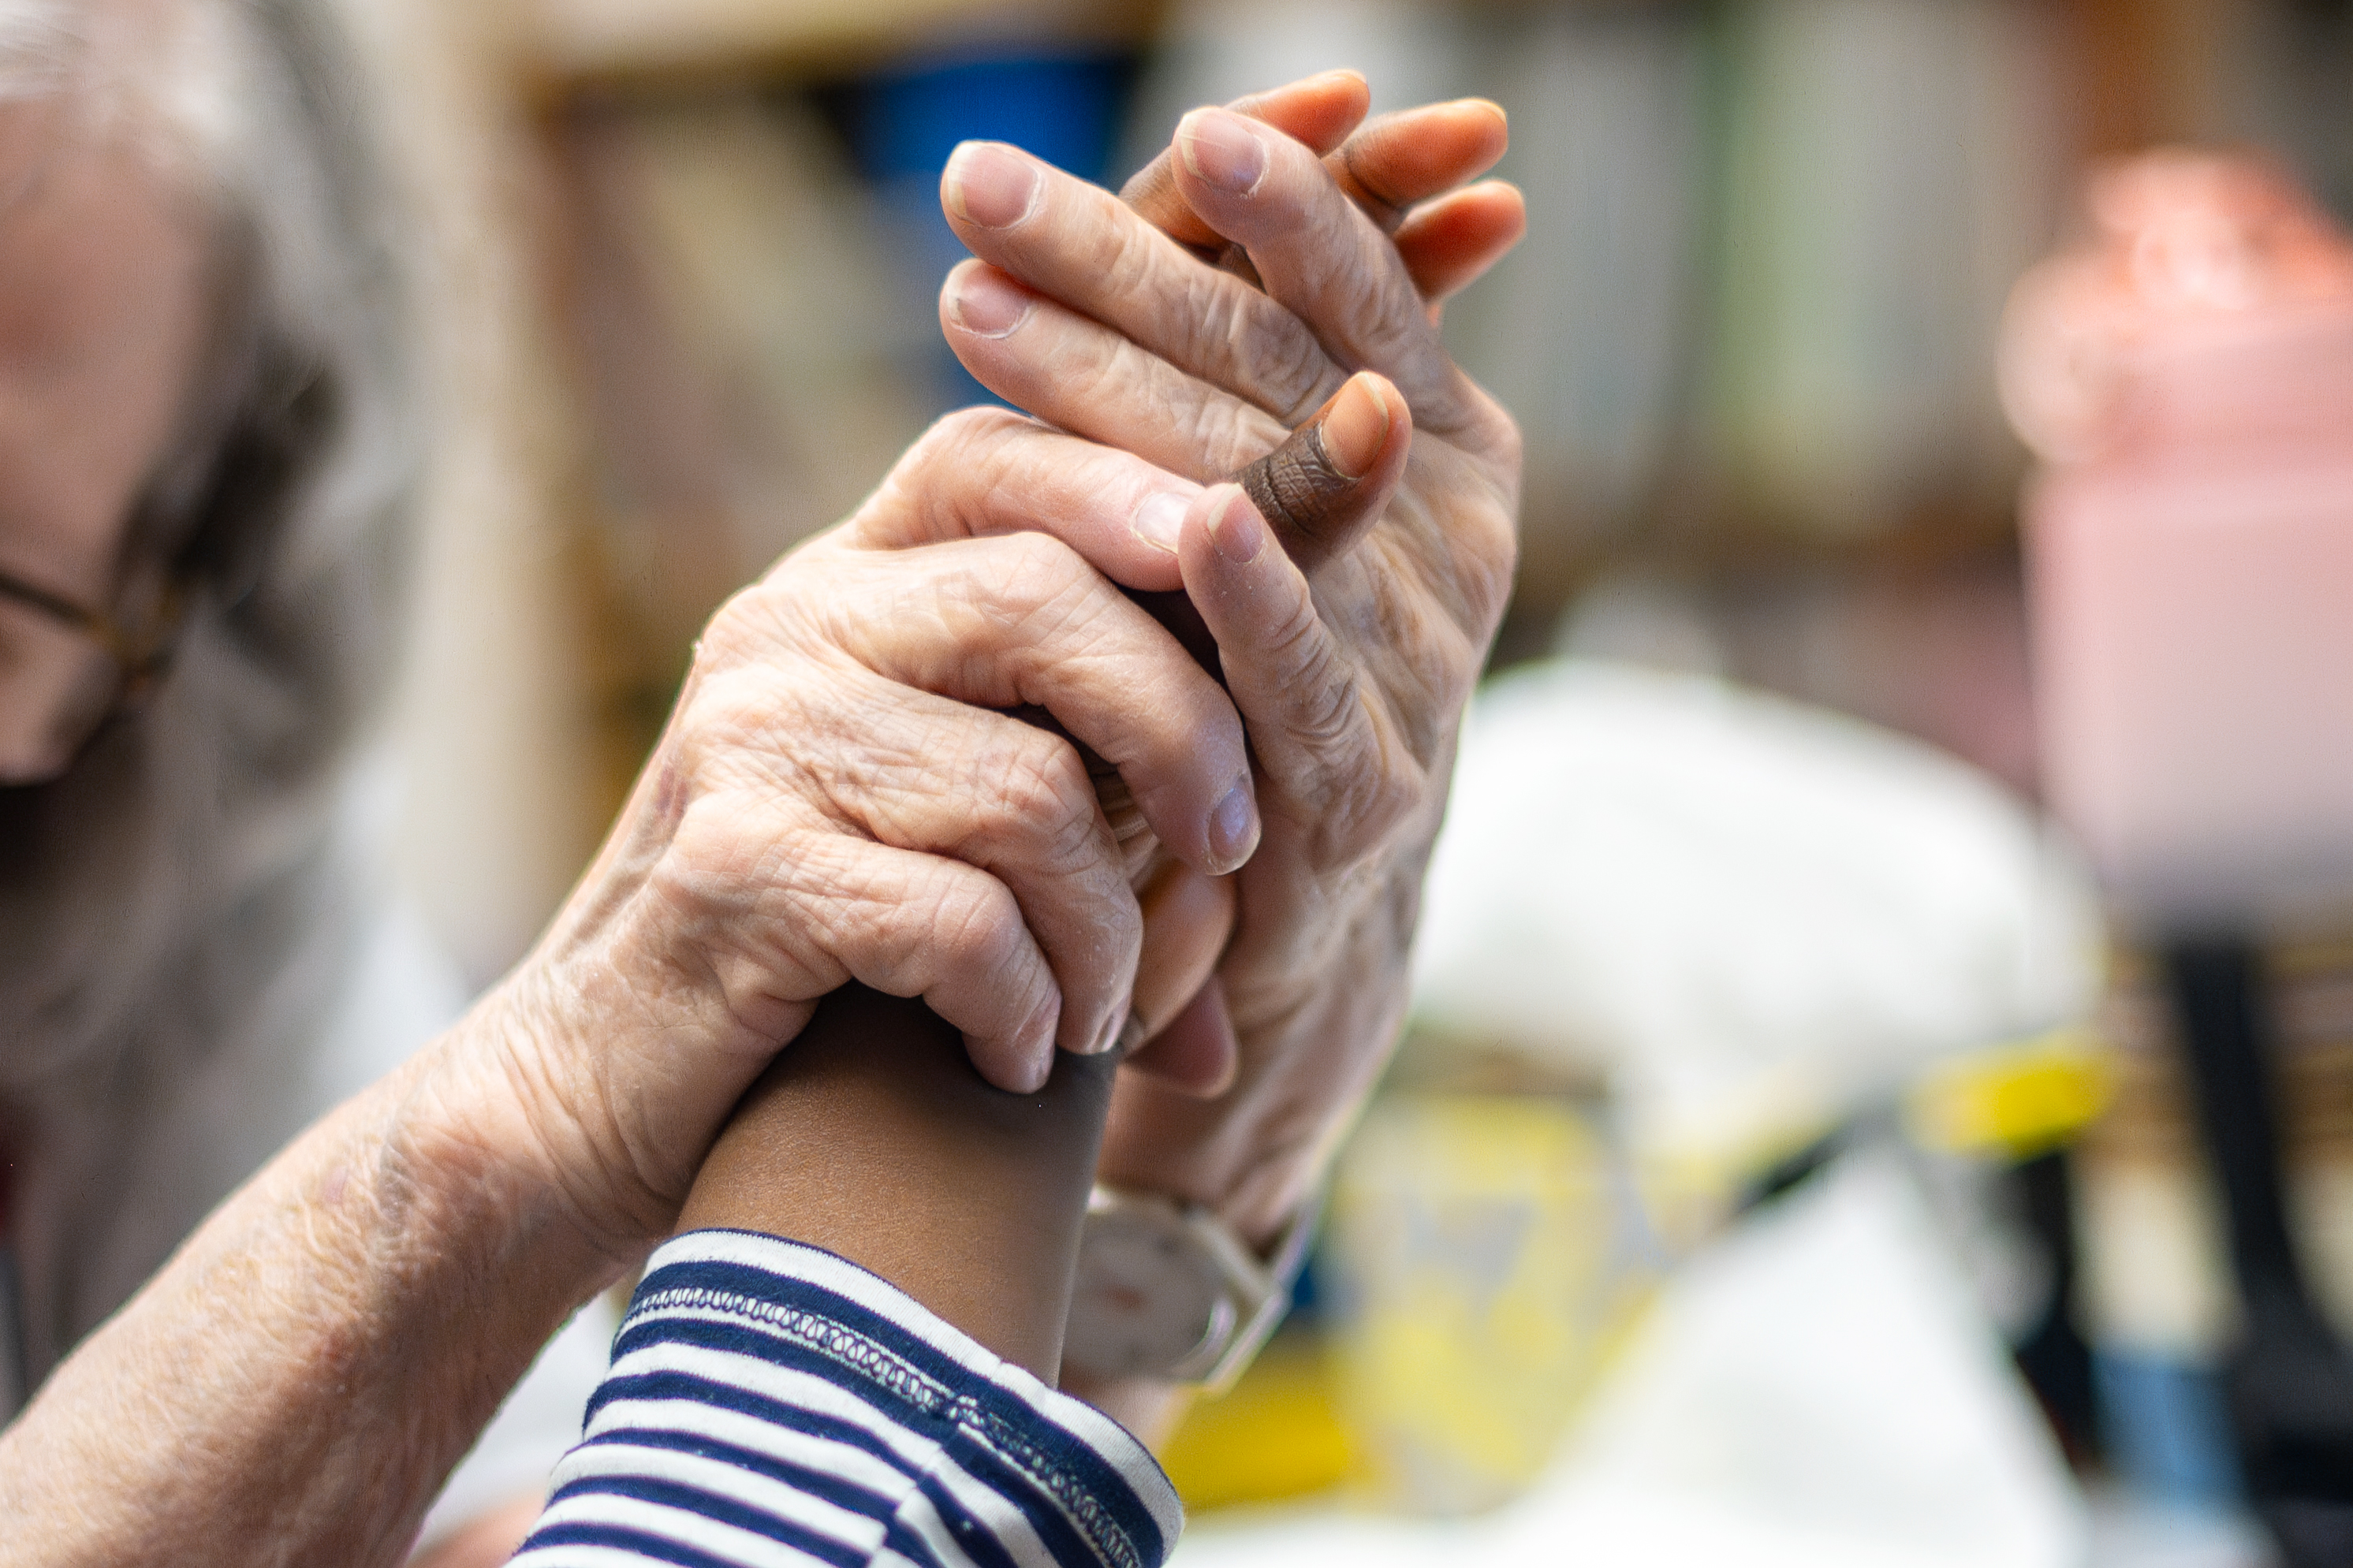 two hands of an older person grasp the hand of a young person